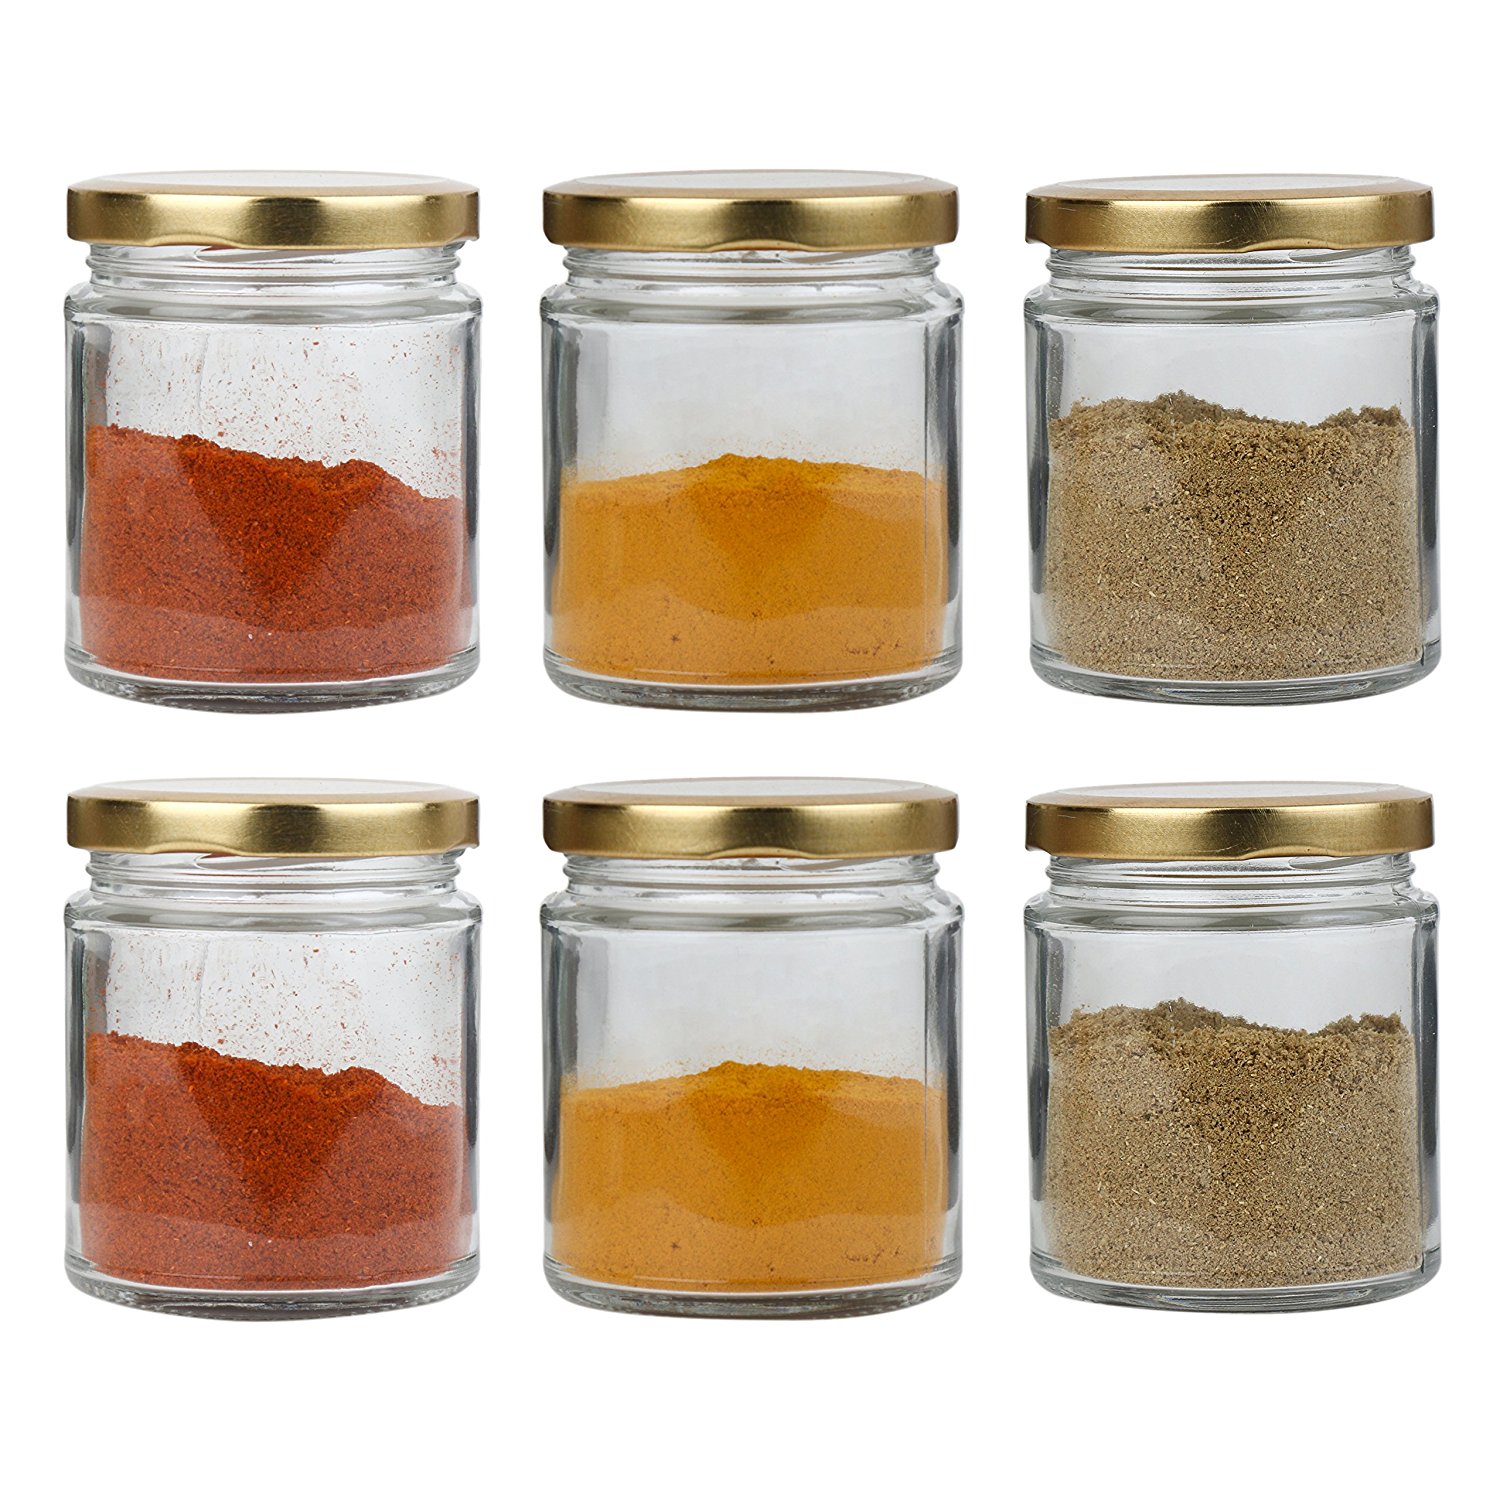 Pure Source India Small Glass jar Set of 6 pcs coming with metal Golden color Air Tight and Rust proof cap , Capacity 50 Gram About Made In India Price in India